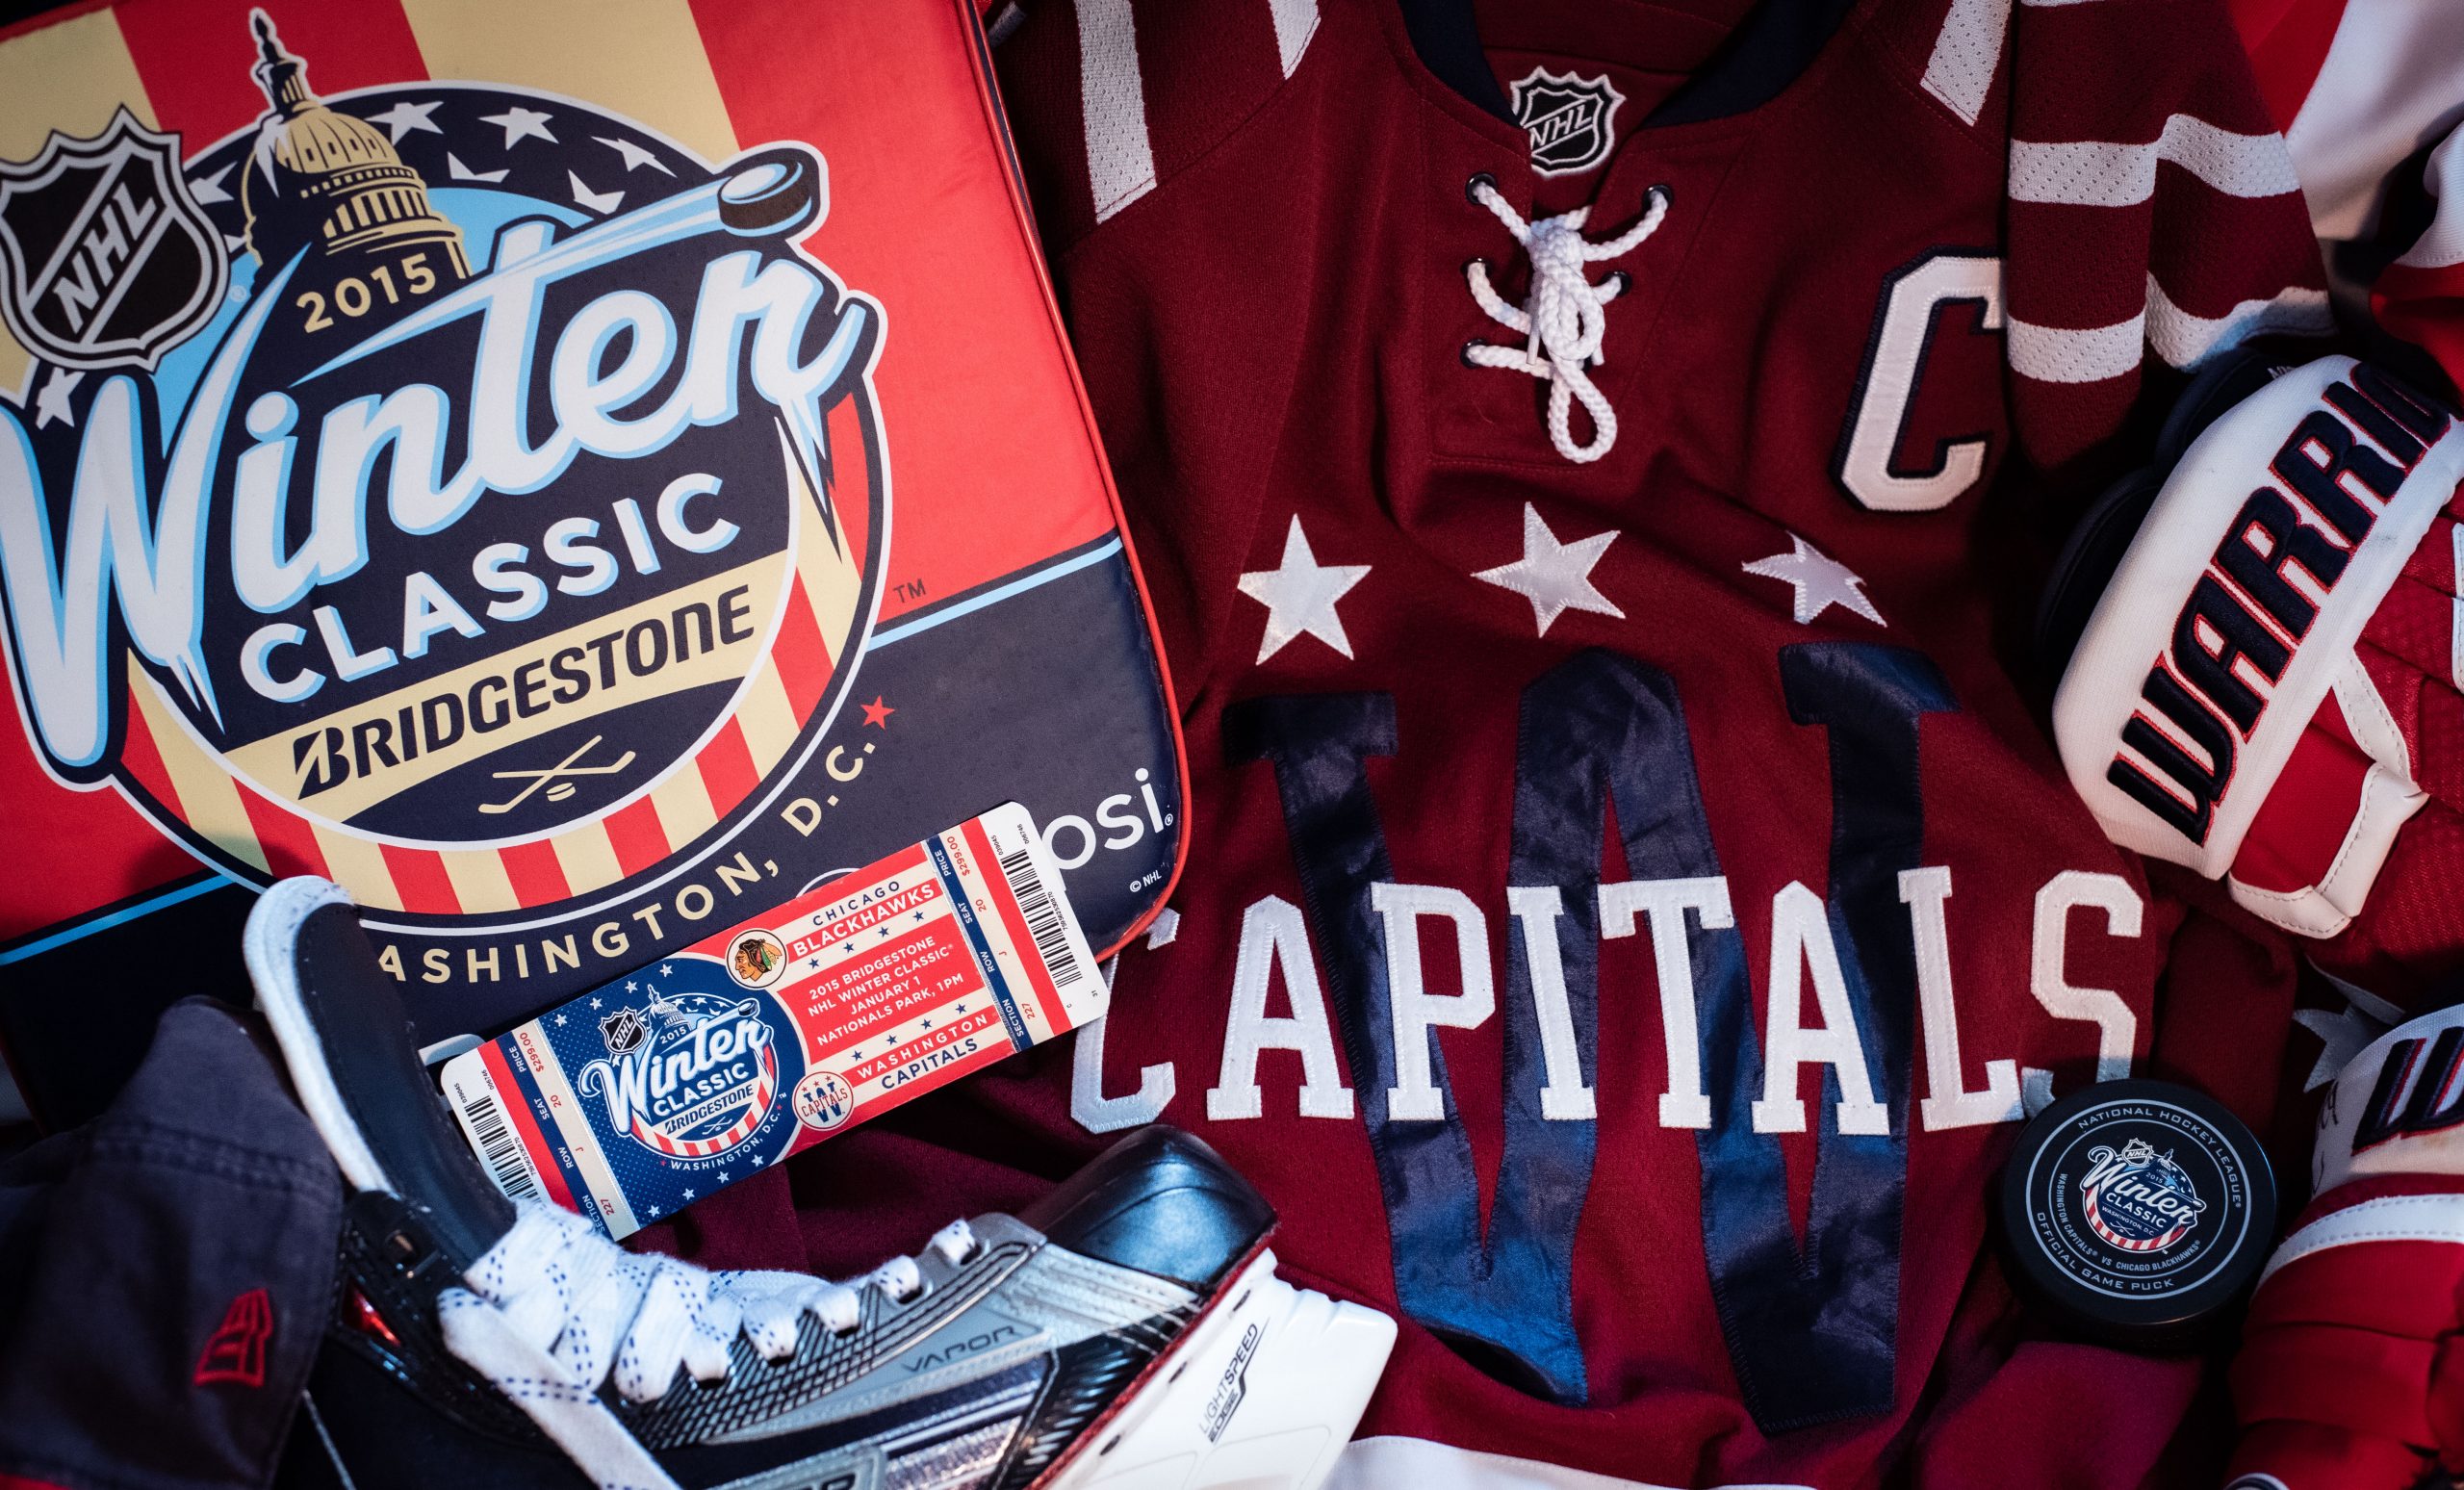 How can the NHL make the Winter Classic more exciting?